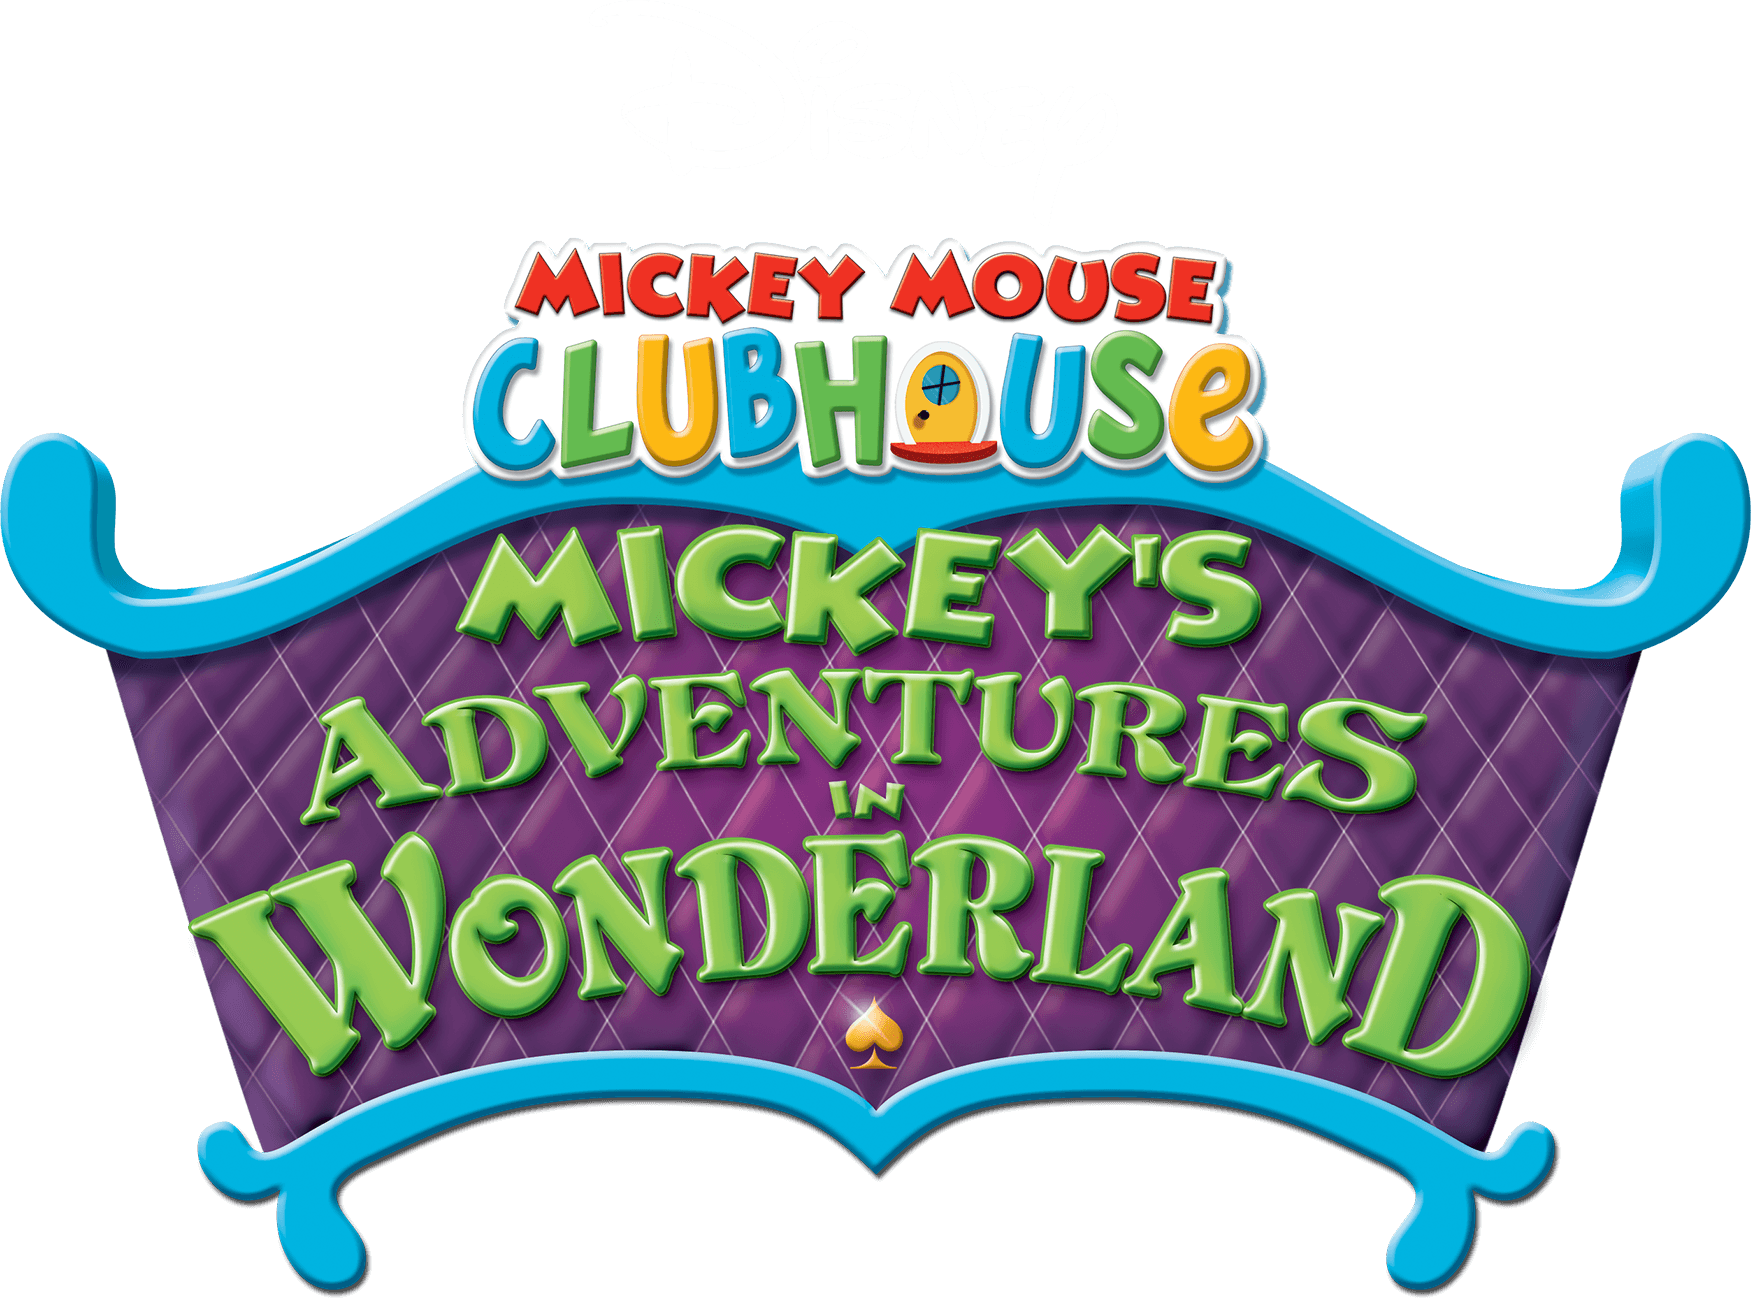 Mickey Mouse Clubhouse: Mickey's Adventures in Wonderland logo